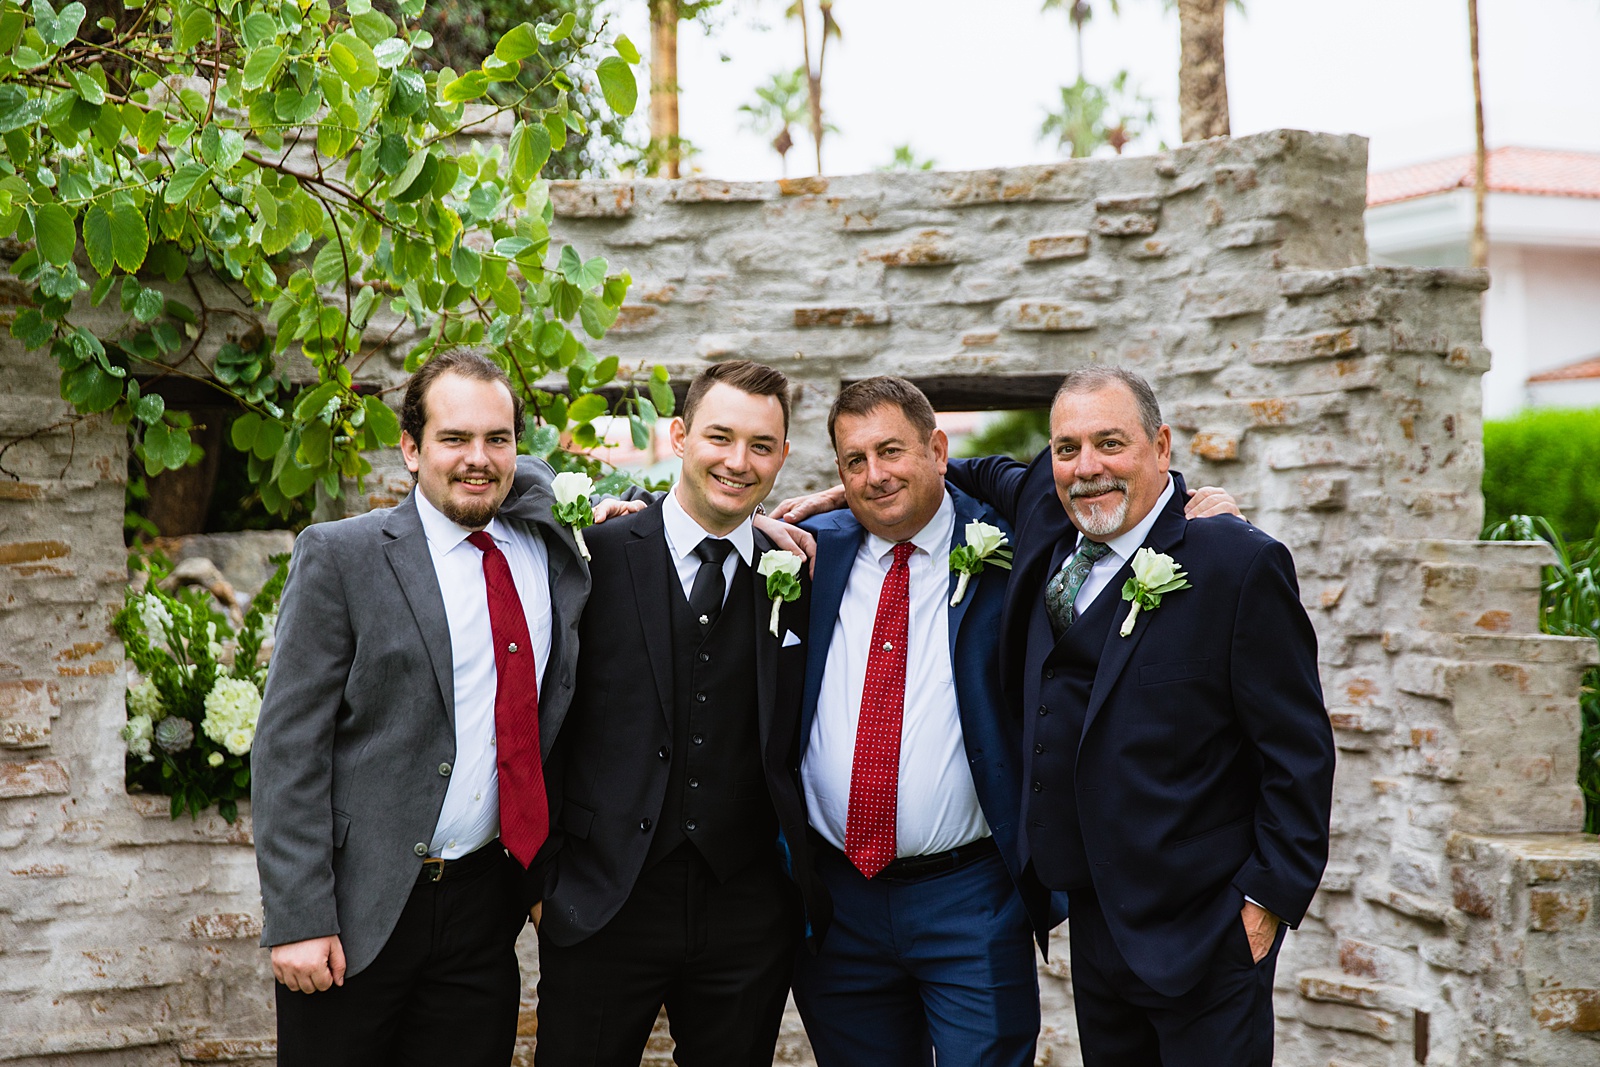 Groom and groomsmen together at a The Scott wedding by Arizona wedding photographer PMA Photography.